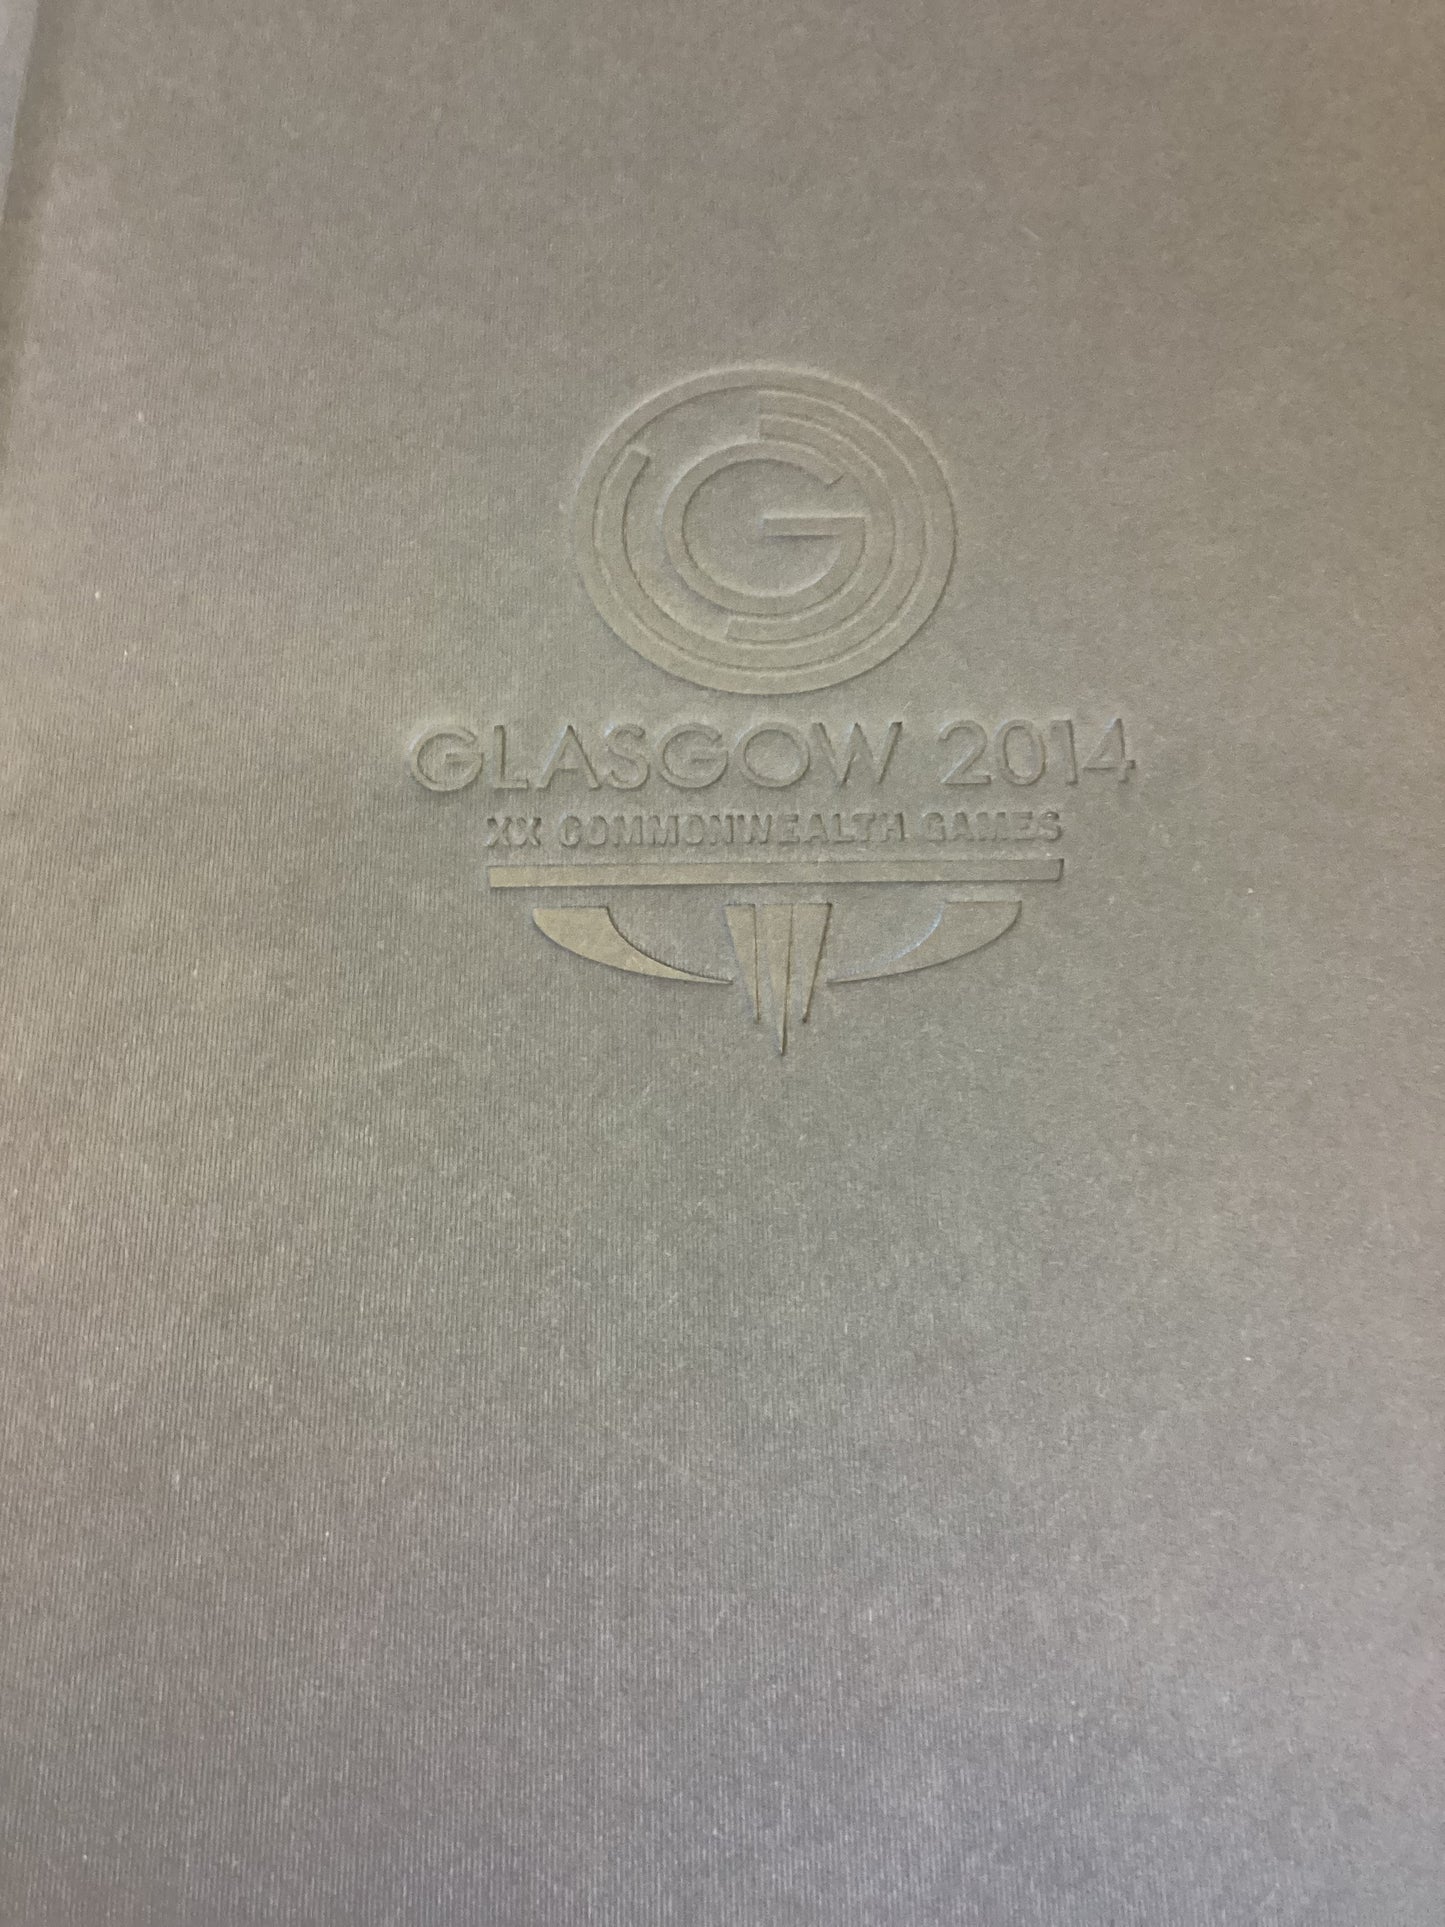 Glasgow 2014 Official Photostory XX Commenwealth Games